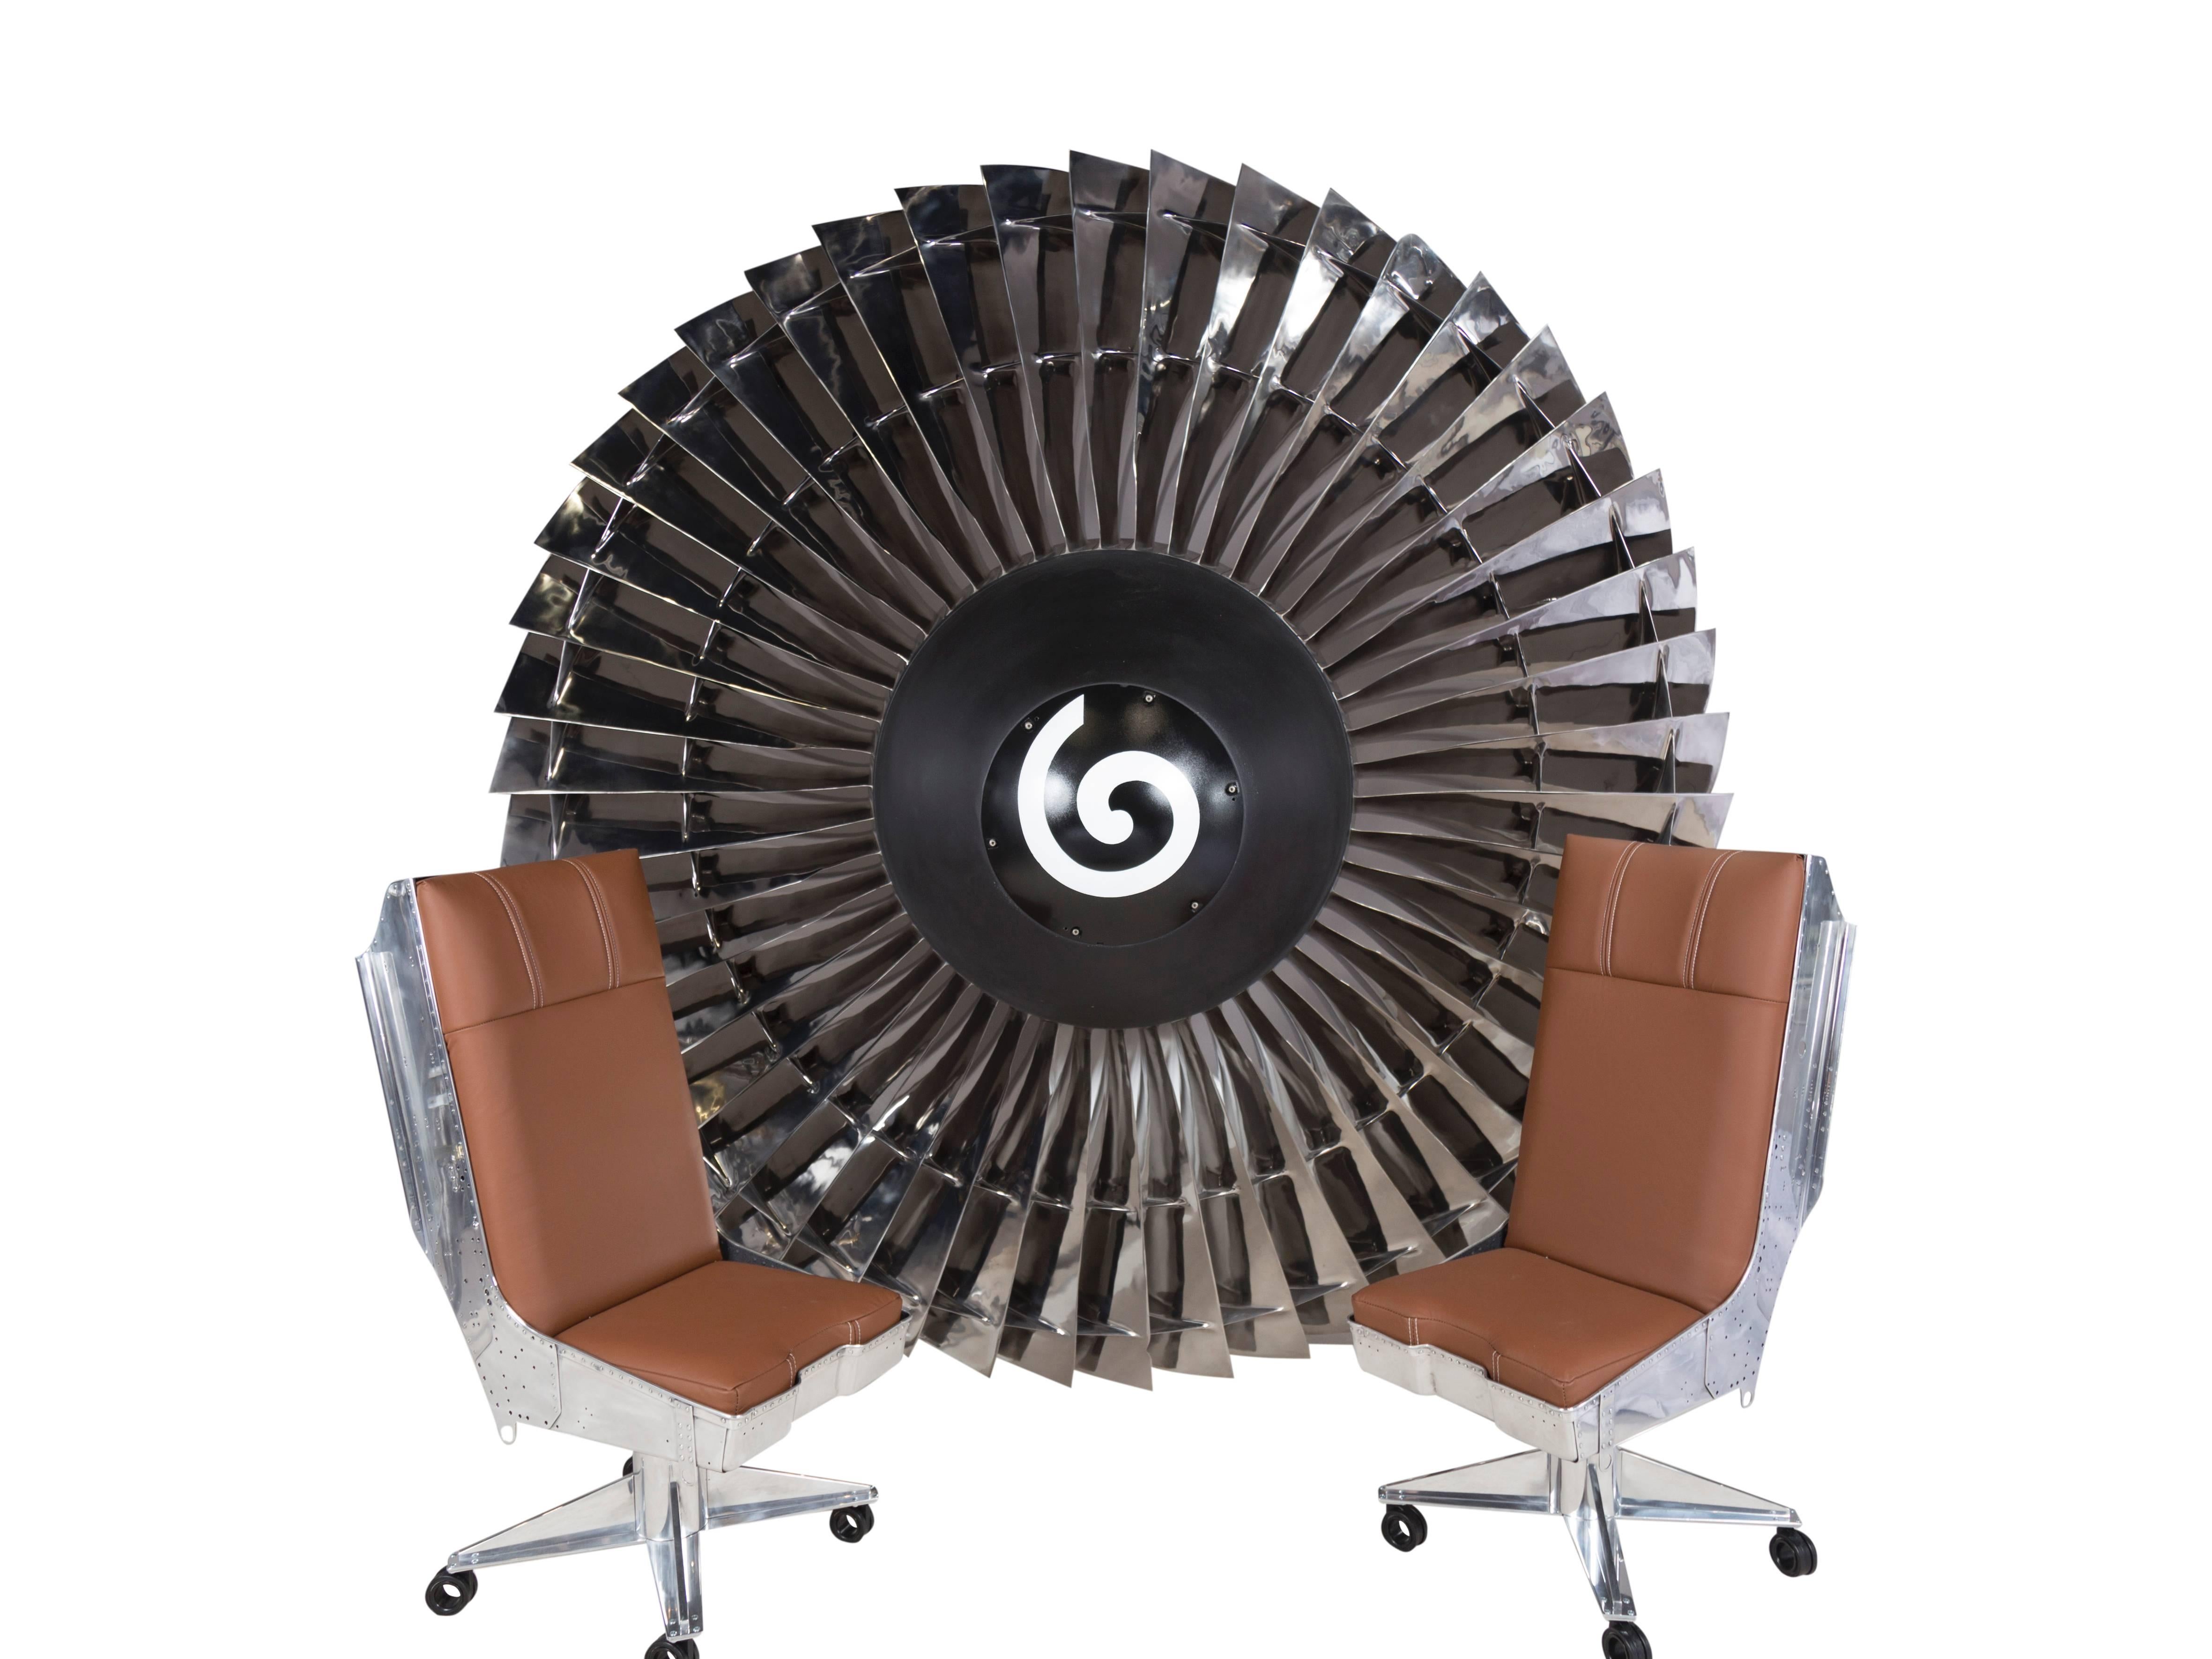 This impressive sculptural piece is an authentic, hand-polished fan blade from a Boeing 747 aircraft. The Pratt & Whitney JT9D engine was the first high-bypass-ratio jet engine to power a wide-body airliner. Its initial application was the Boeing